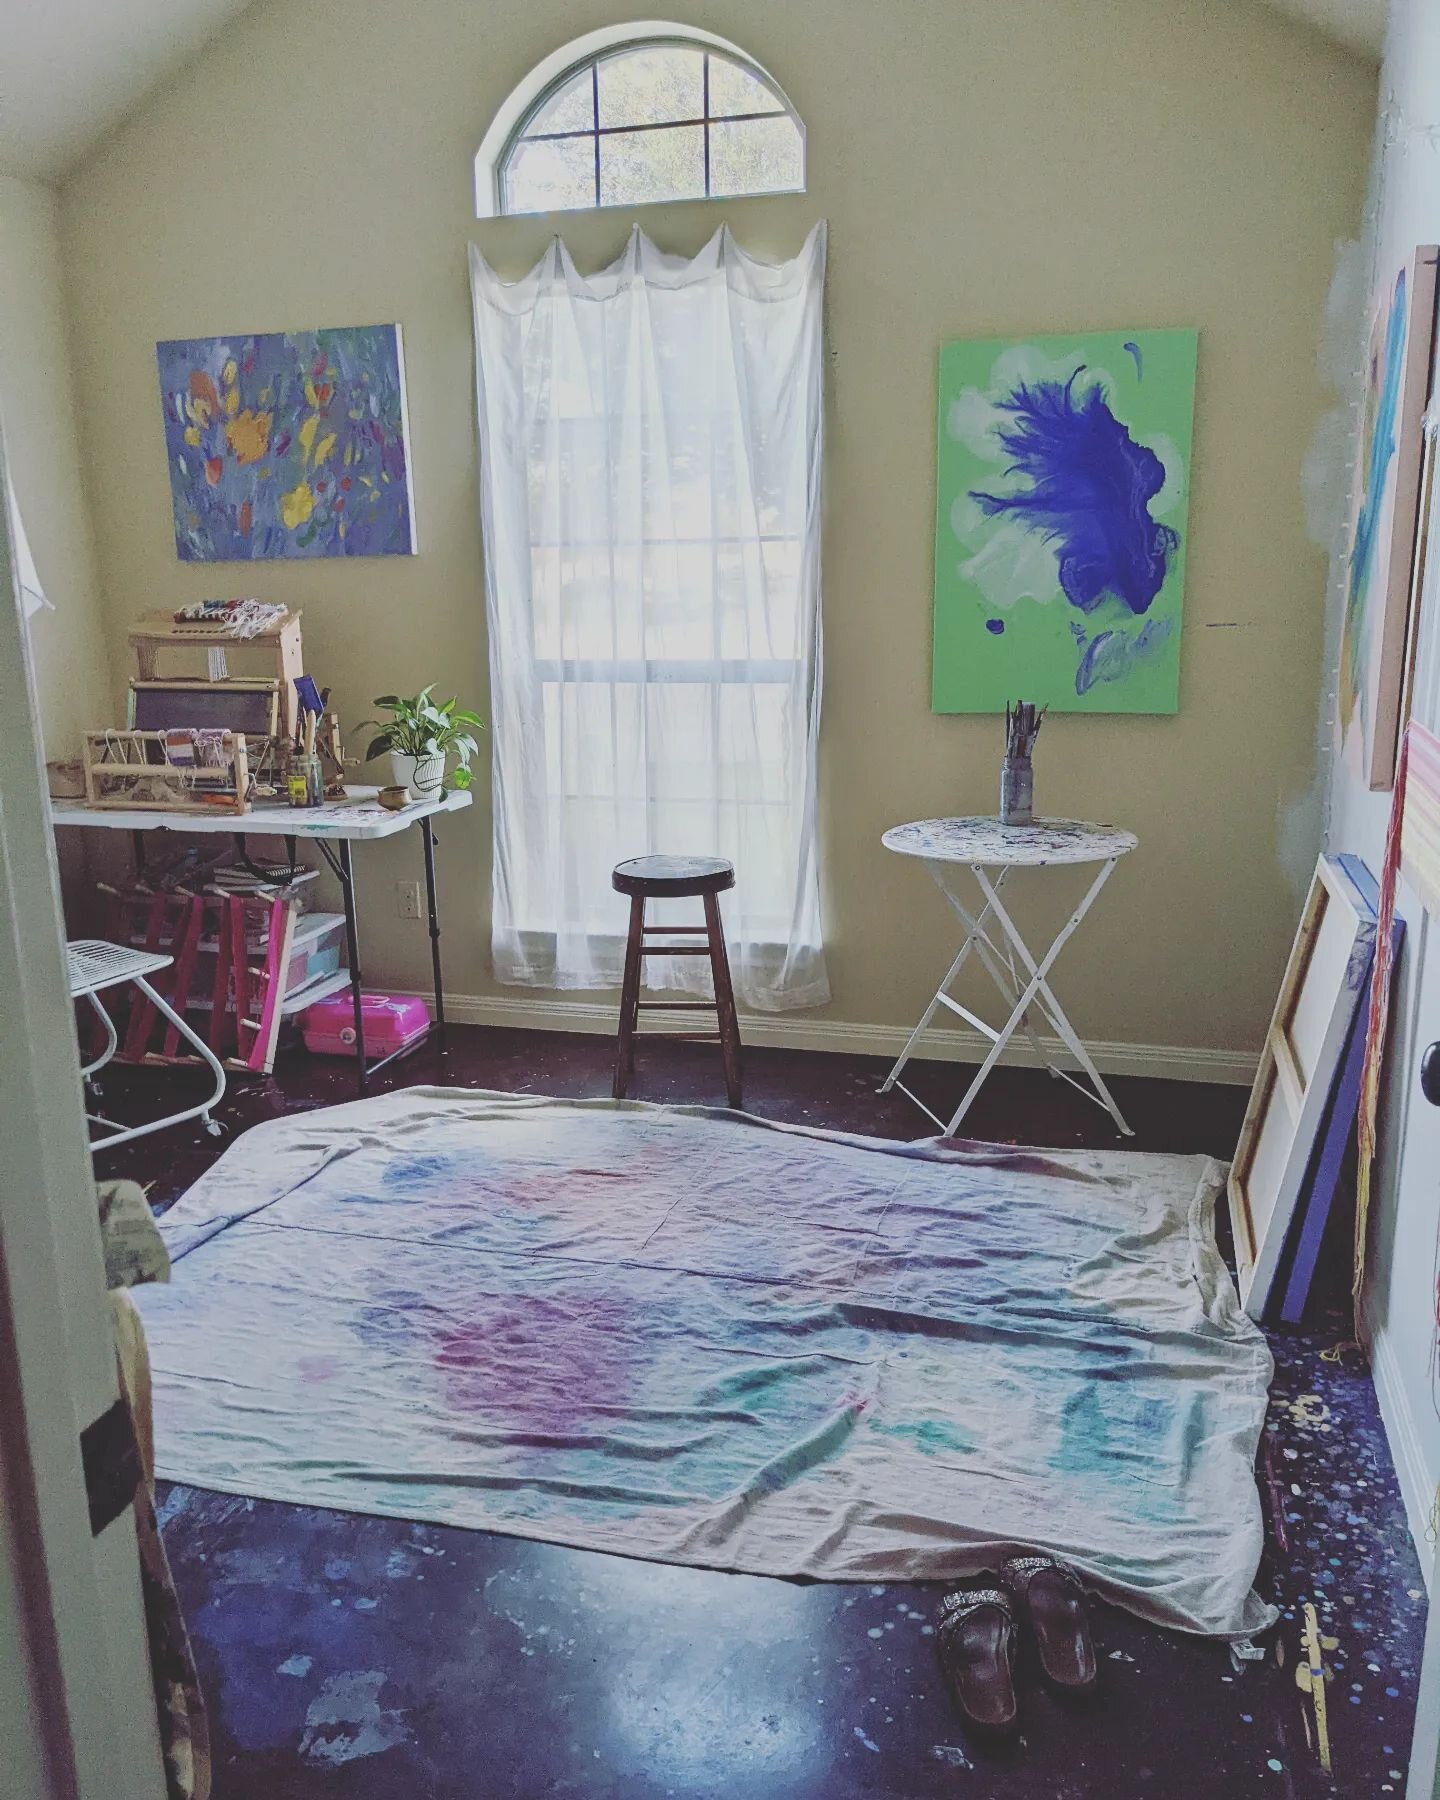 A little studio view from last month. A space where wonder meets possibilty. 💗

&quot;The most regretful people on earth are those who felt the call to creative work, who felt their own creative power restive and uprising, and gave to it neither pow